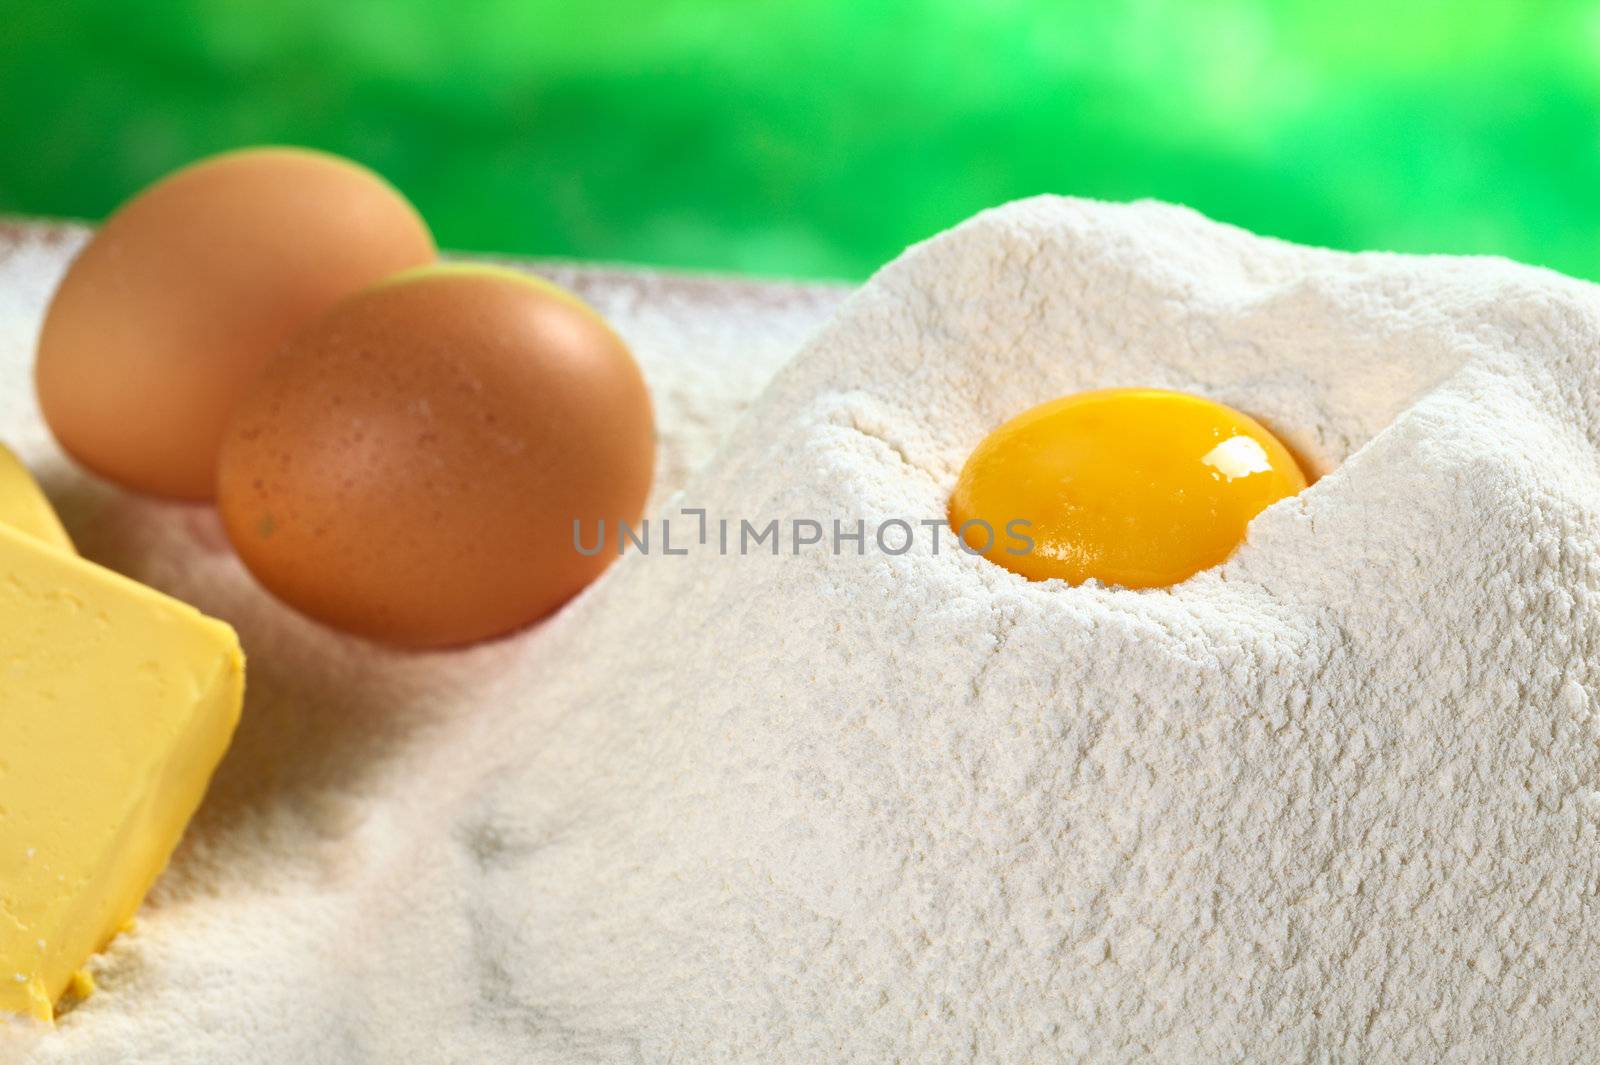 Flour with egg yolk in the middle with eggs and butter on the side (Selective Focus, Focus on the front of the flour pile and the front of the egg yolk)